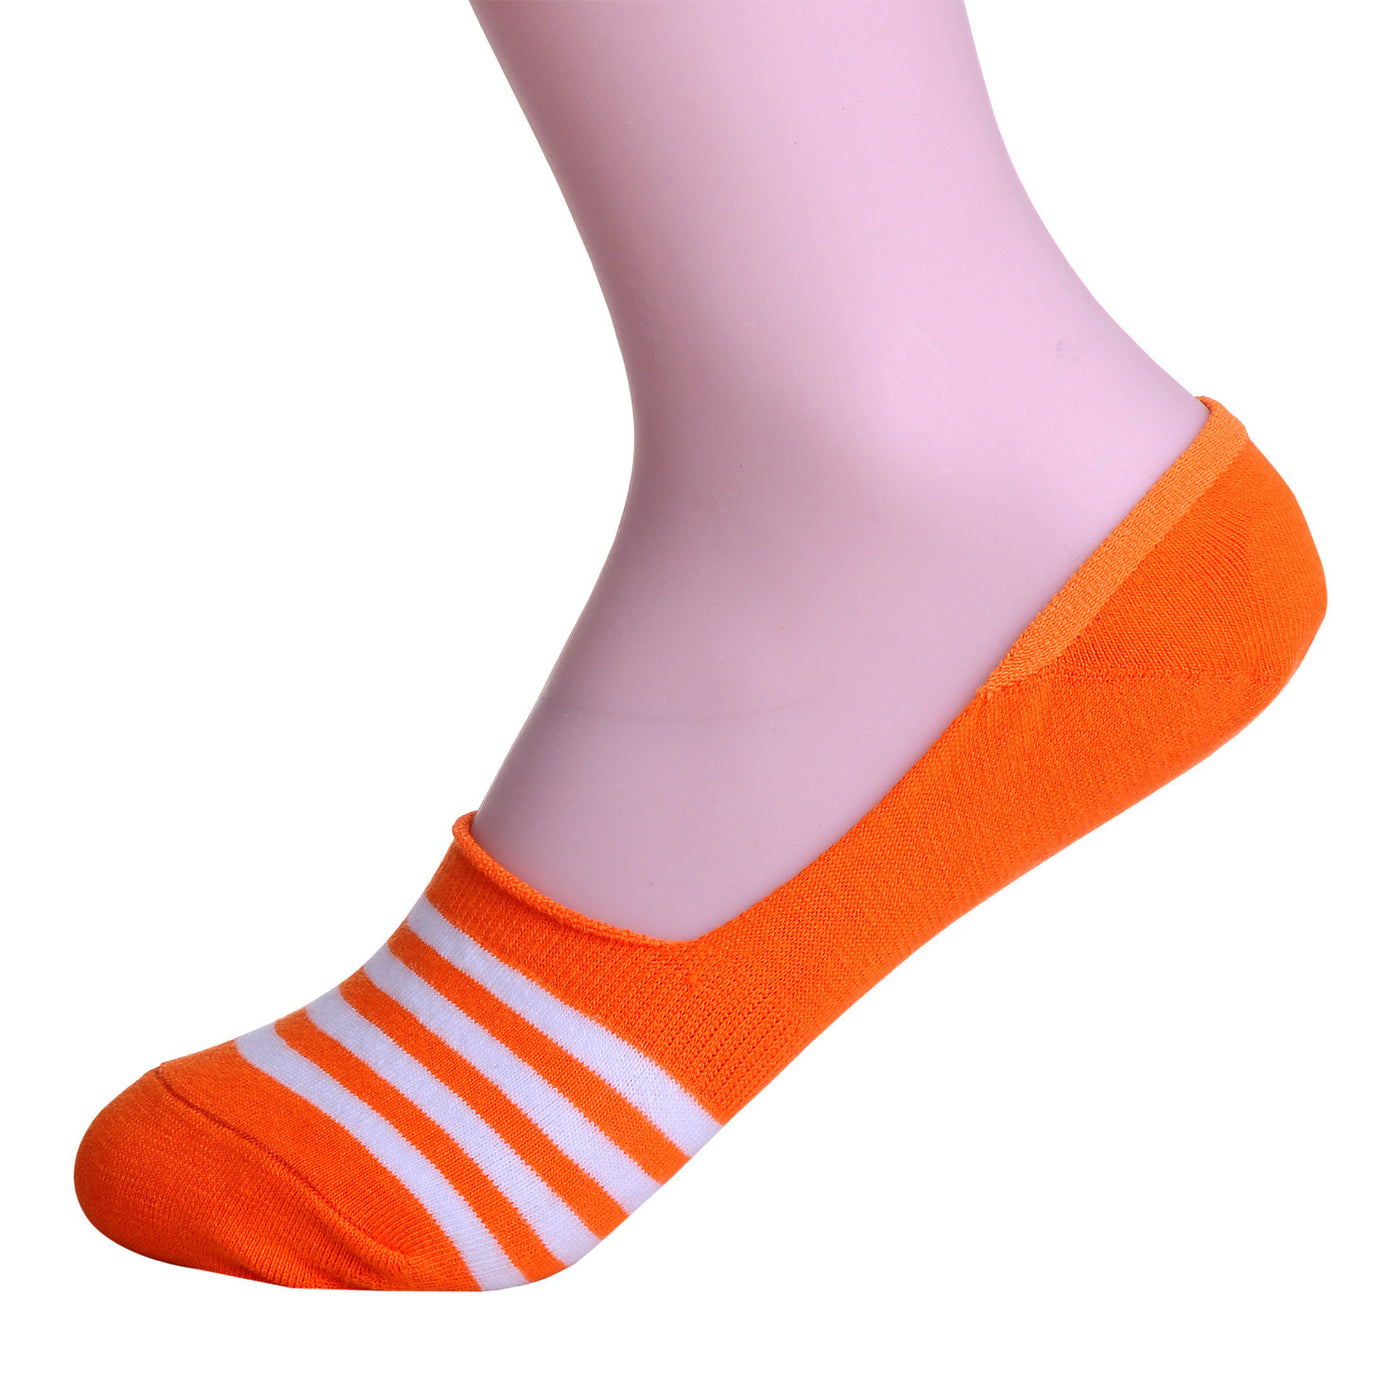 2 Pairs Finest Combed Cotton Invisible Socks Striped - Orange